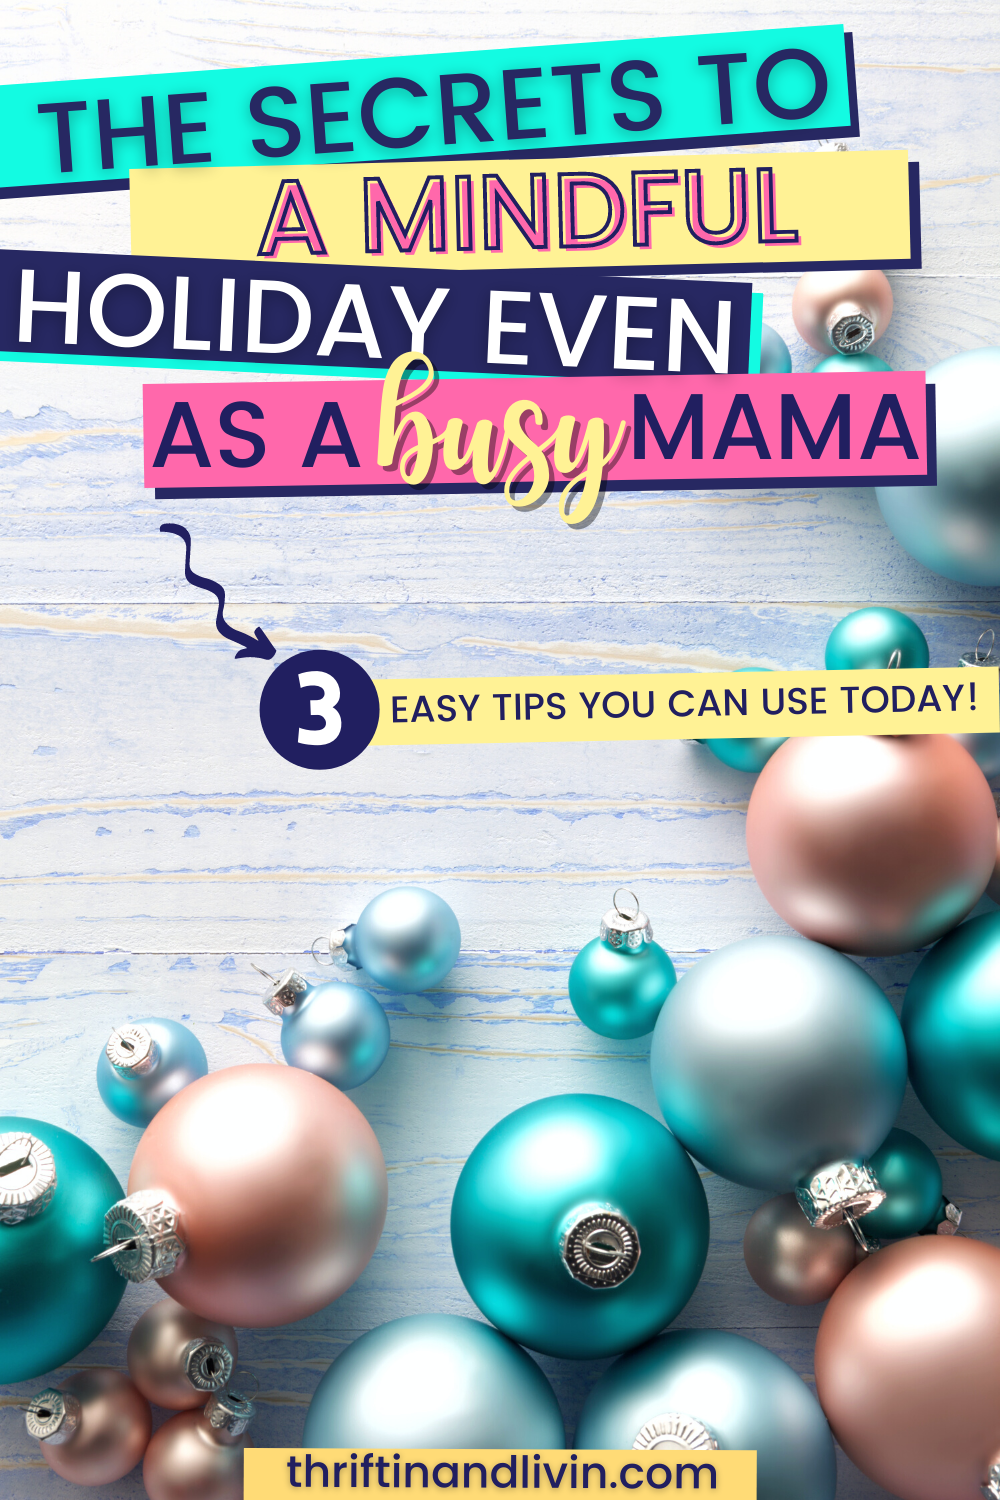 Secrets to a mindful holiday even as a busy mama - pin image 1